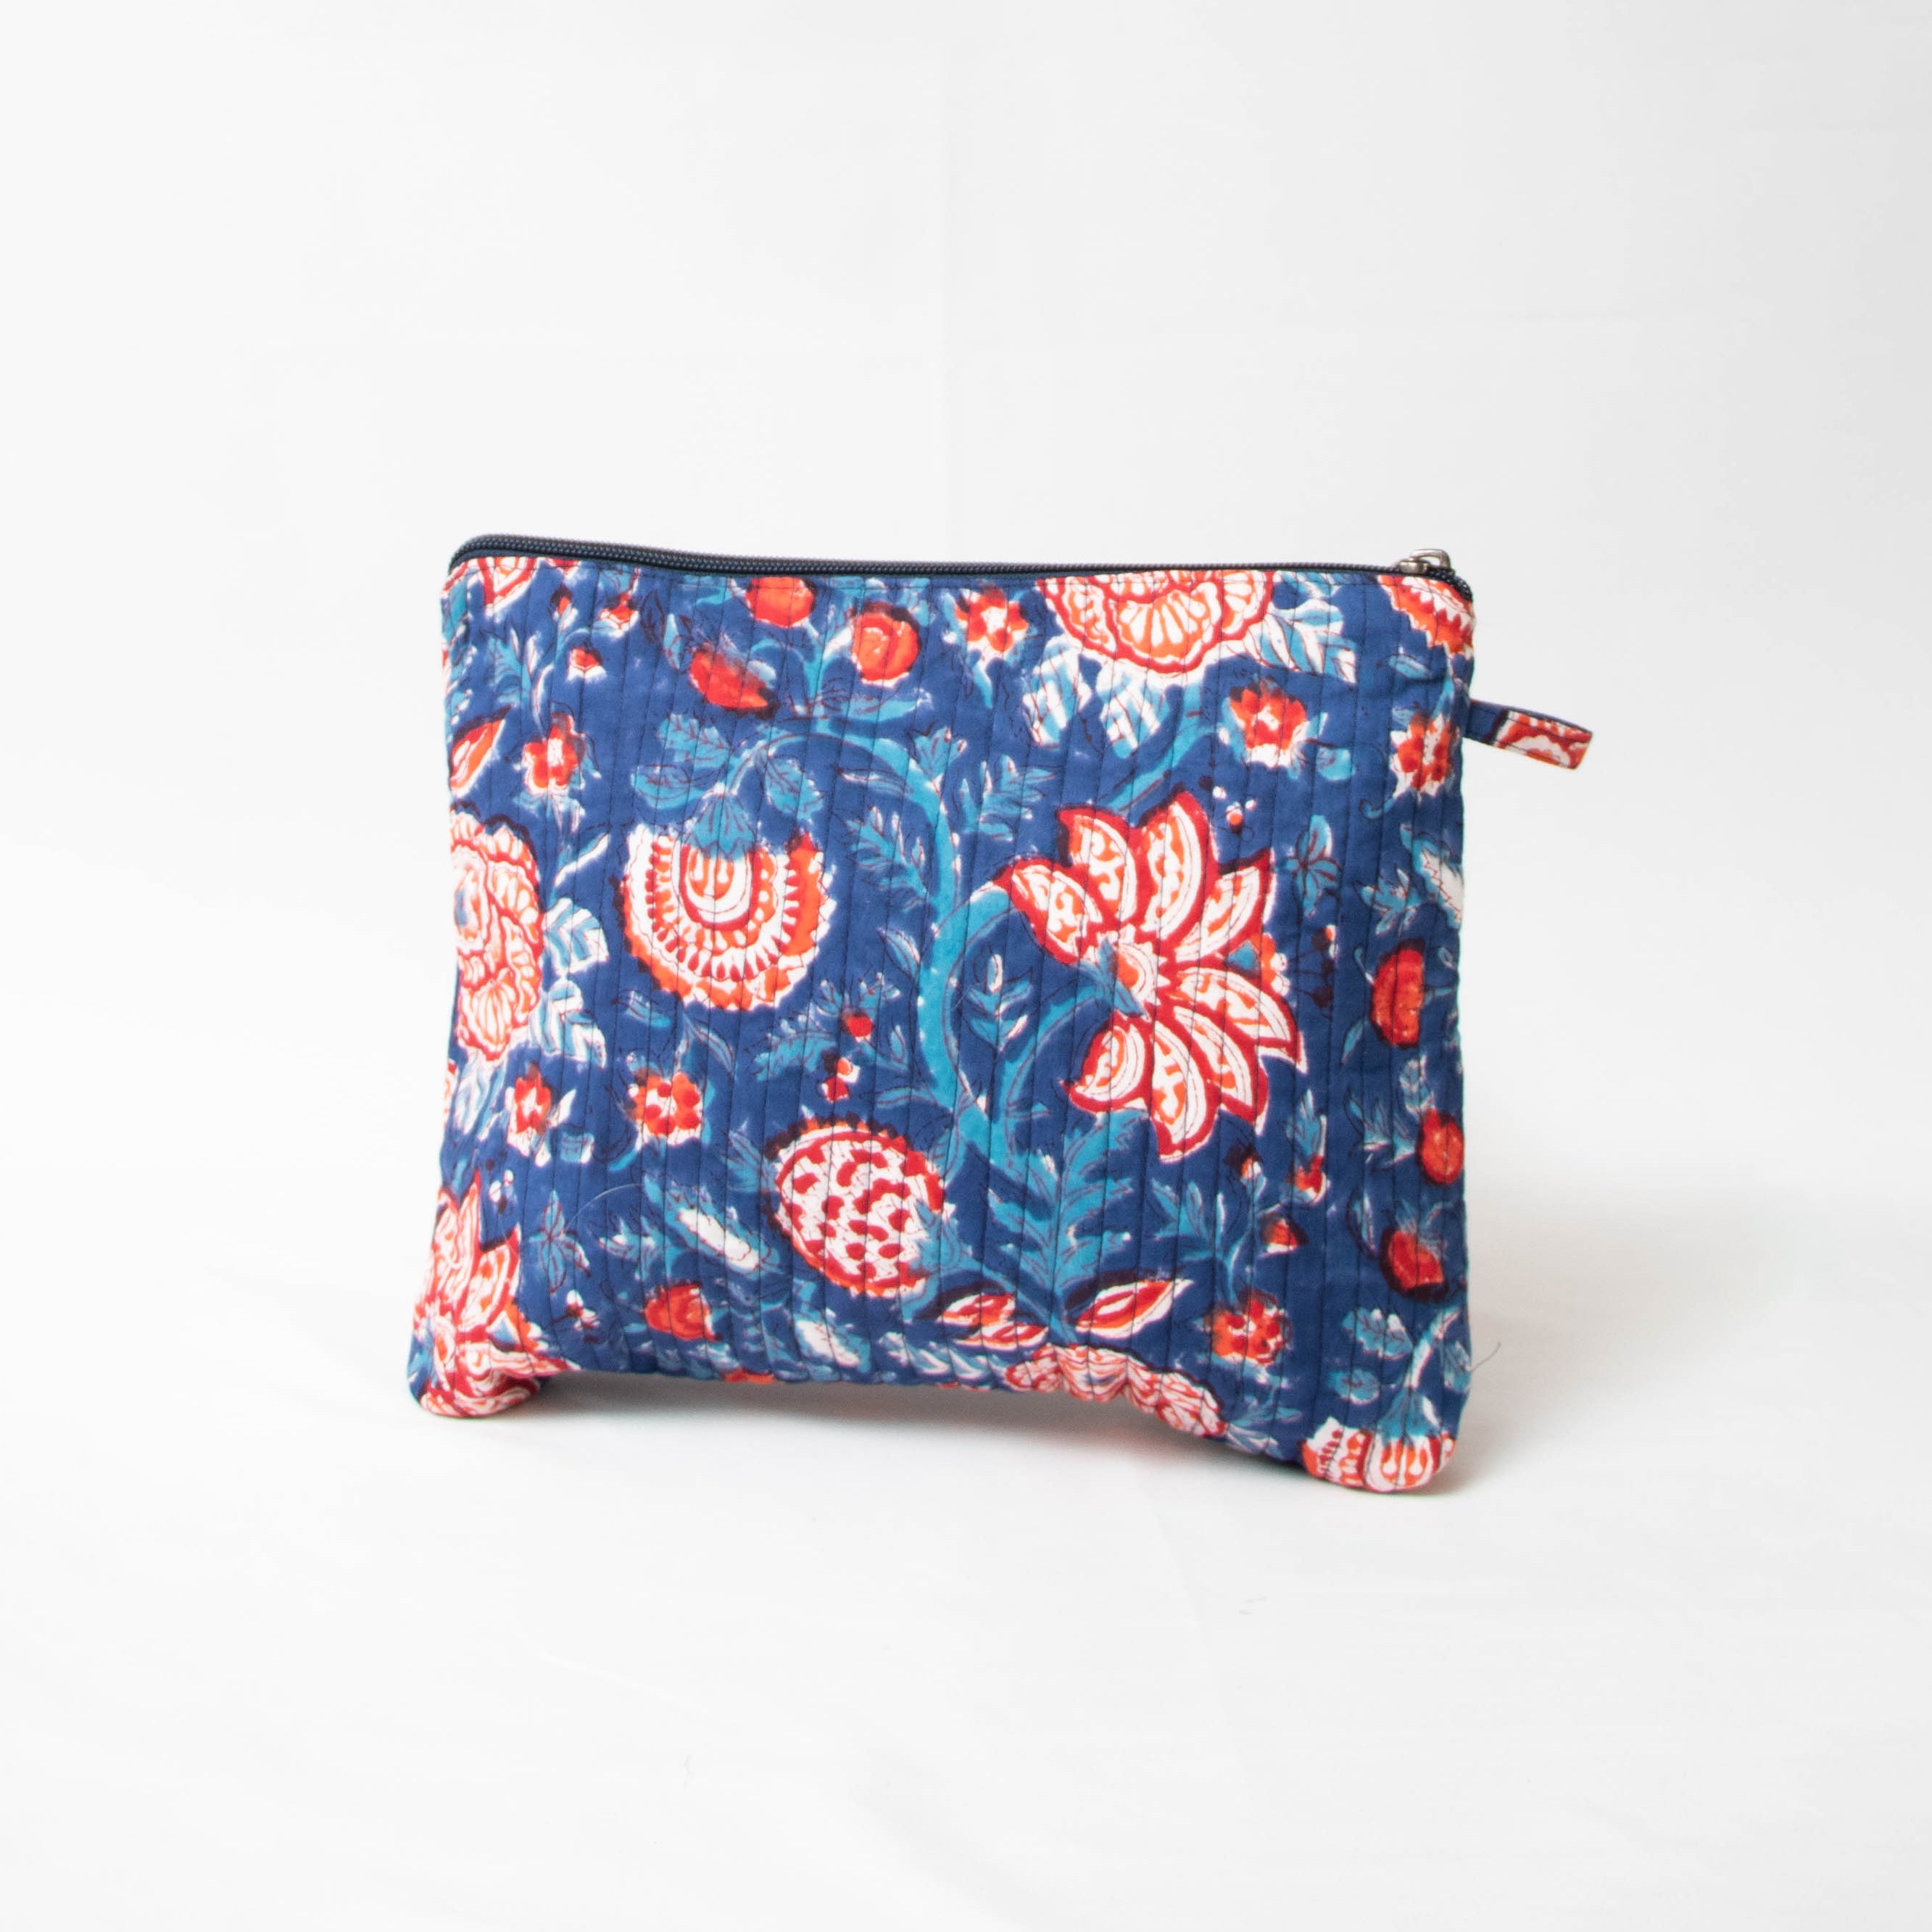 TangTangBags - Printed Quilted Makeup Pouch